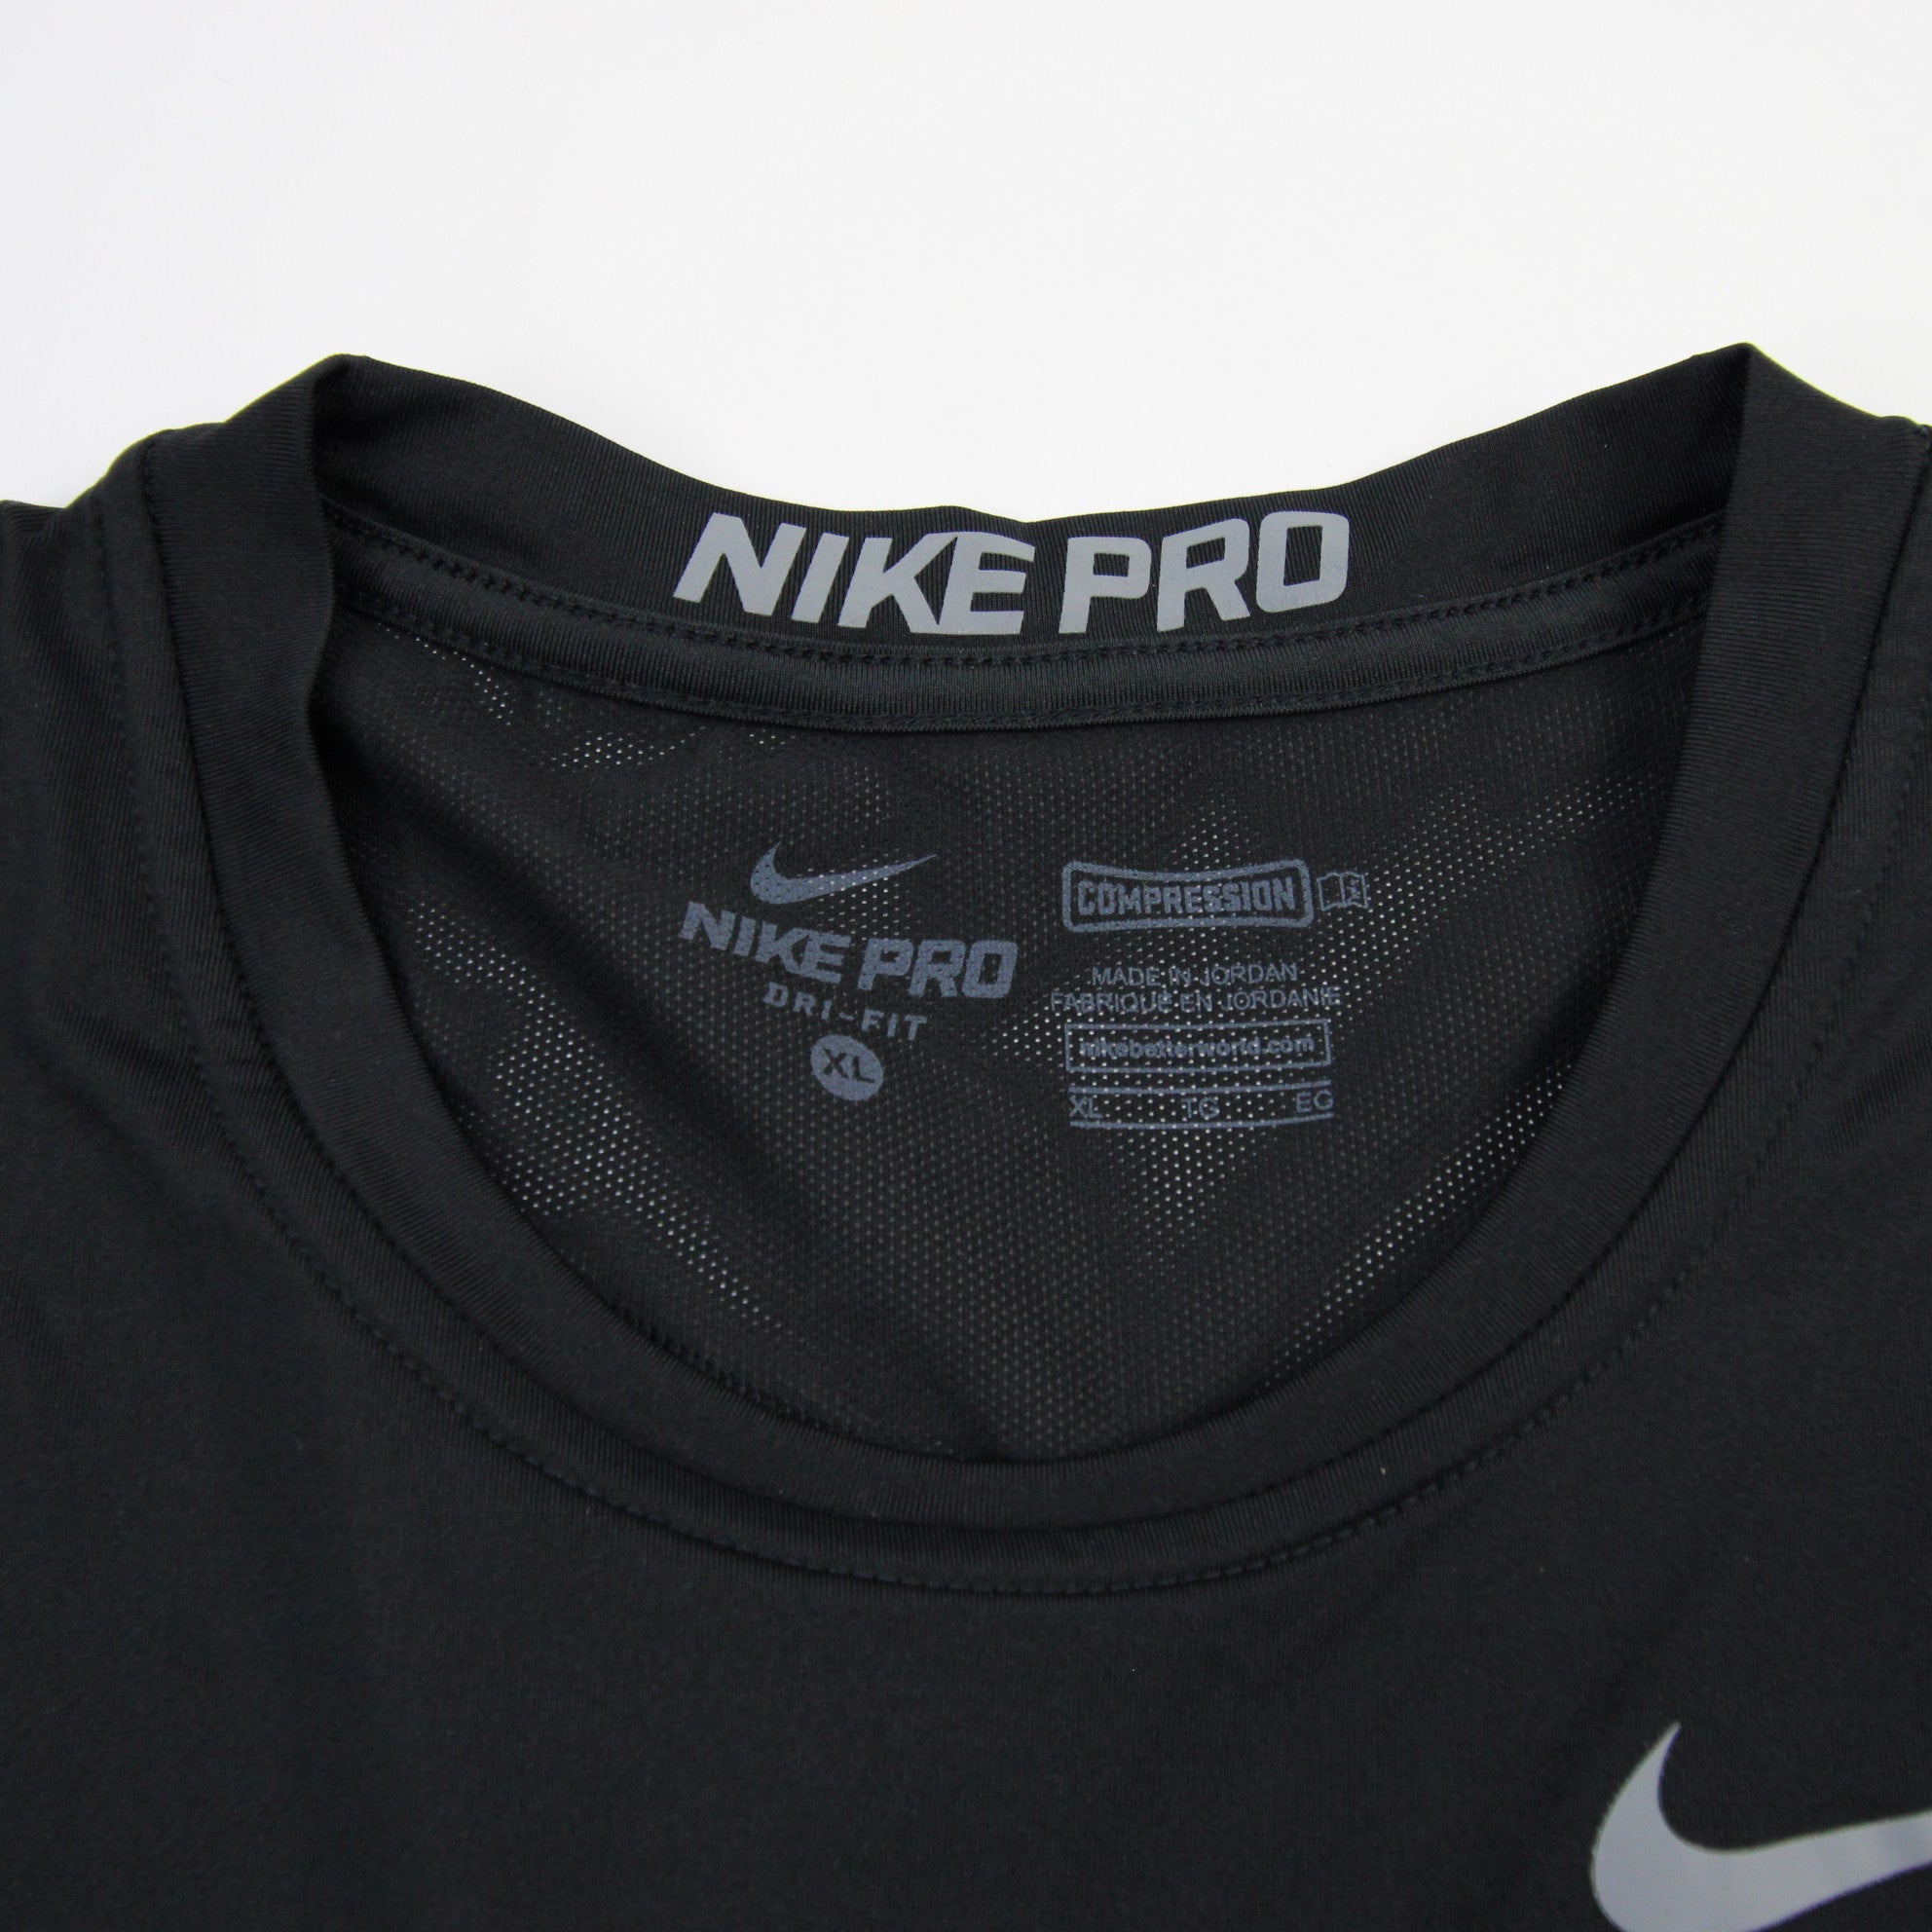 Nike Pro Dri-Fit Compression Top Men's Black New with Tags XL